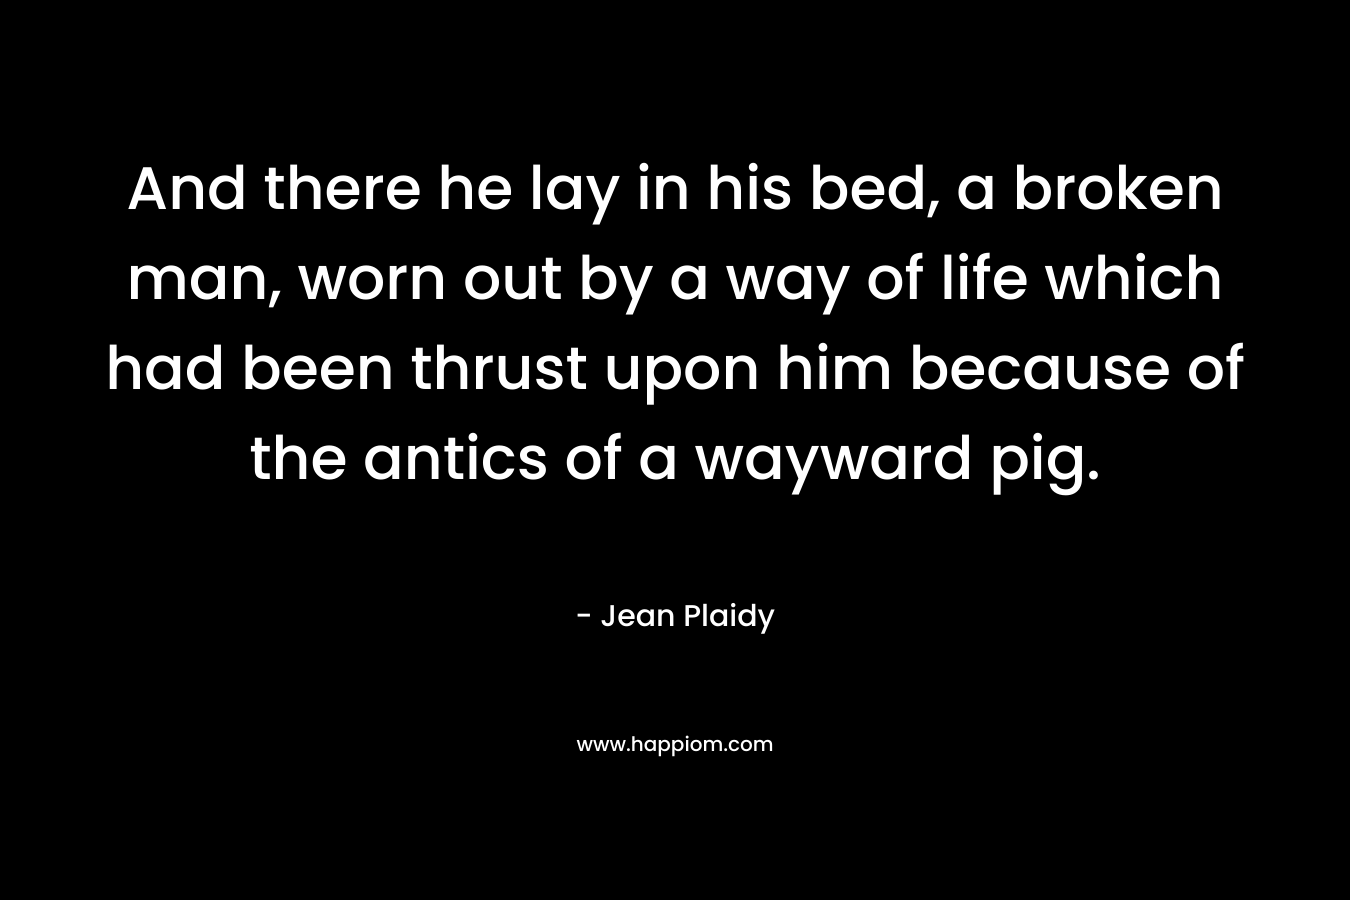 And there he lay in his bed, a broken man, worn out by a way of life which had been thrust upon him because of the antics of a wayward pig. – Jean Plaidy